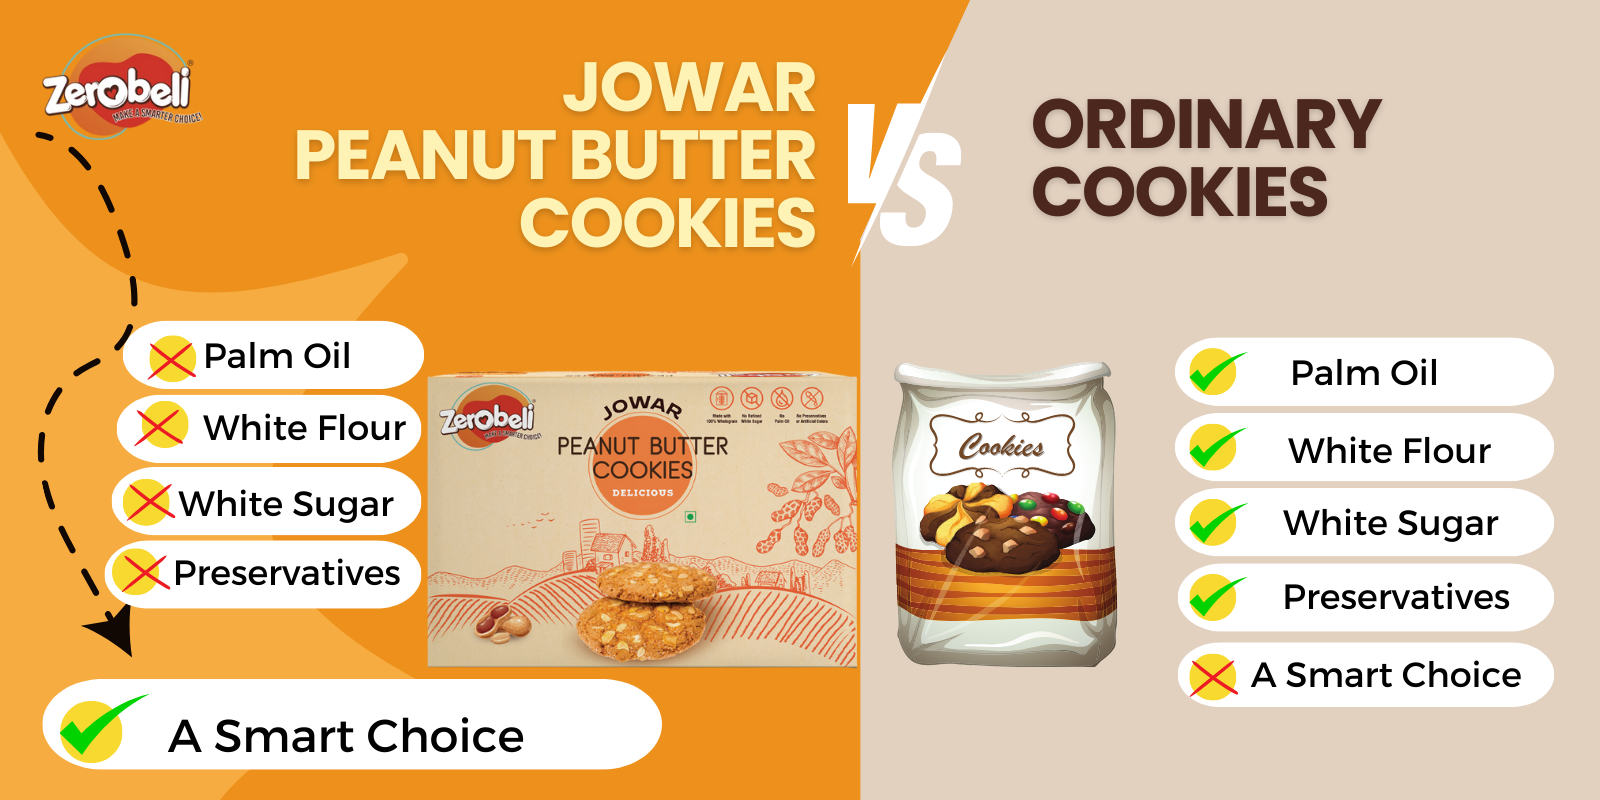 Jowar_PB_Cookie_Competition_315edad1-3ed2-45be-aeb5-845b0a47c865.png